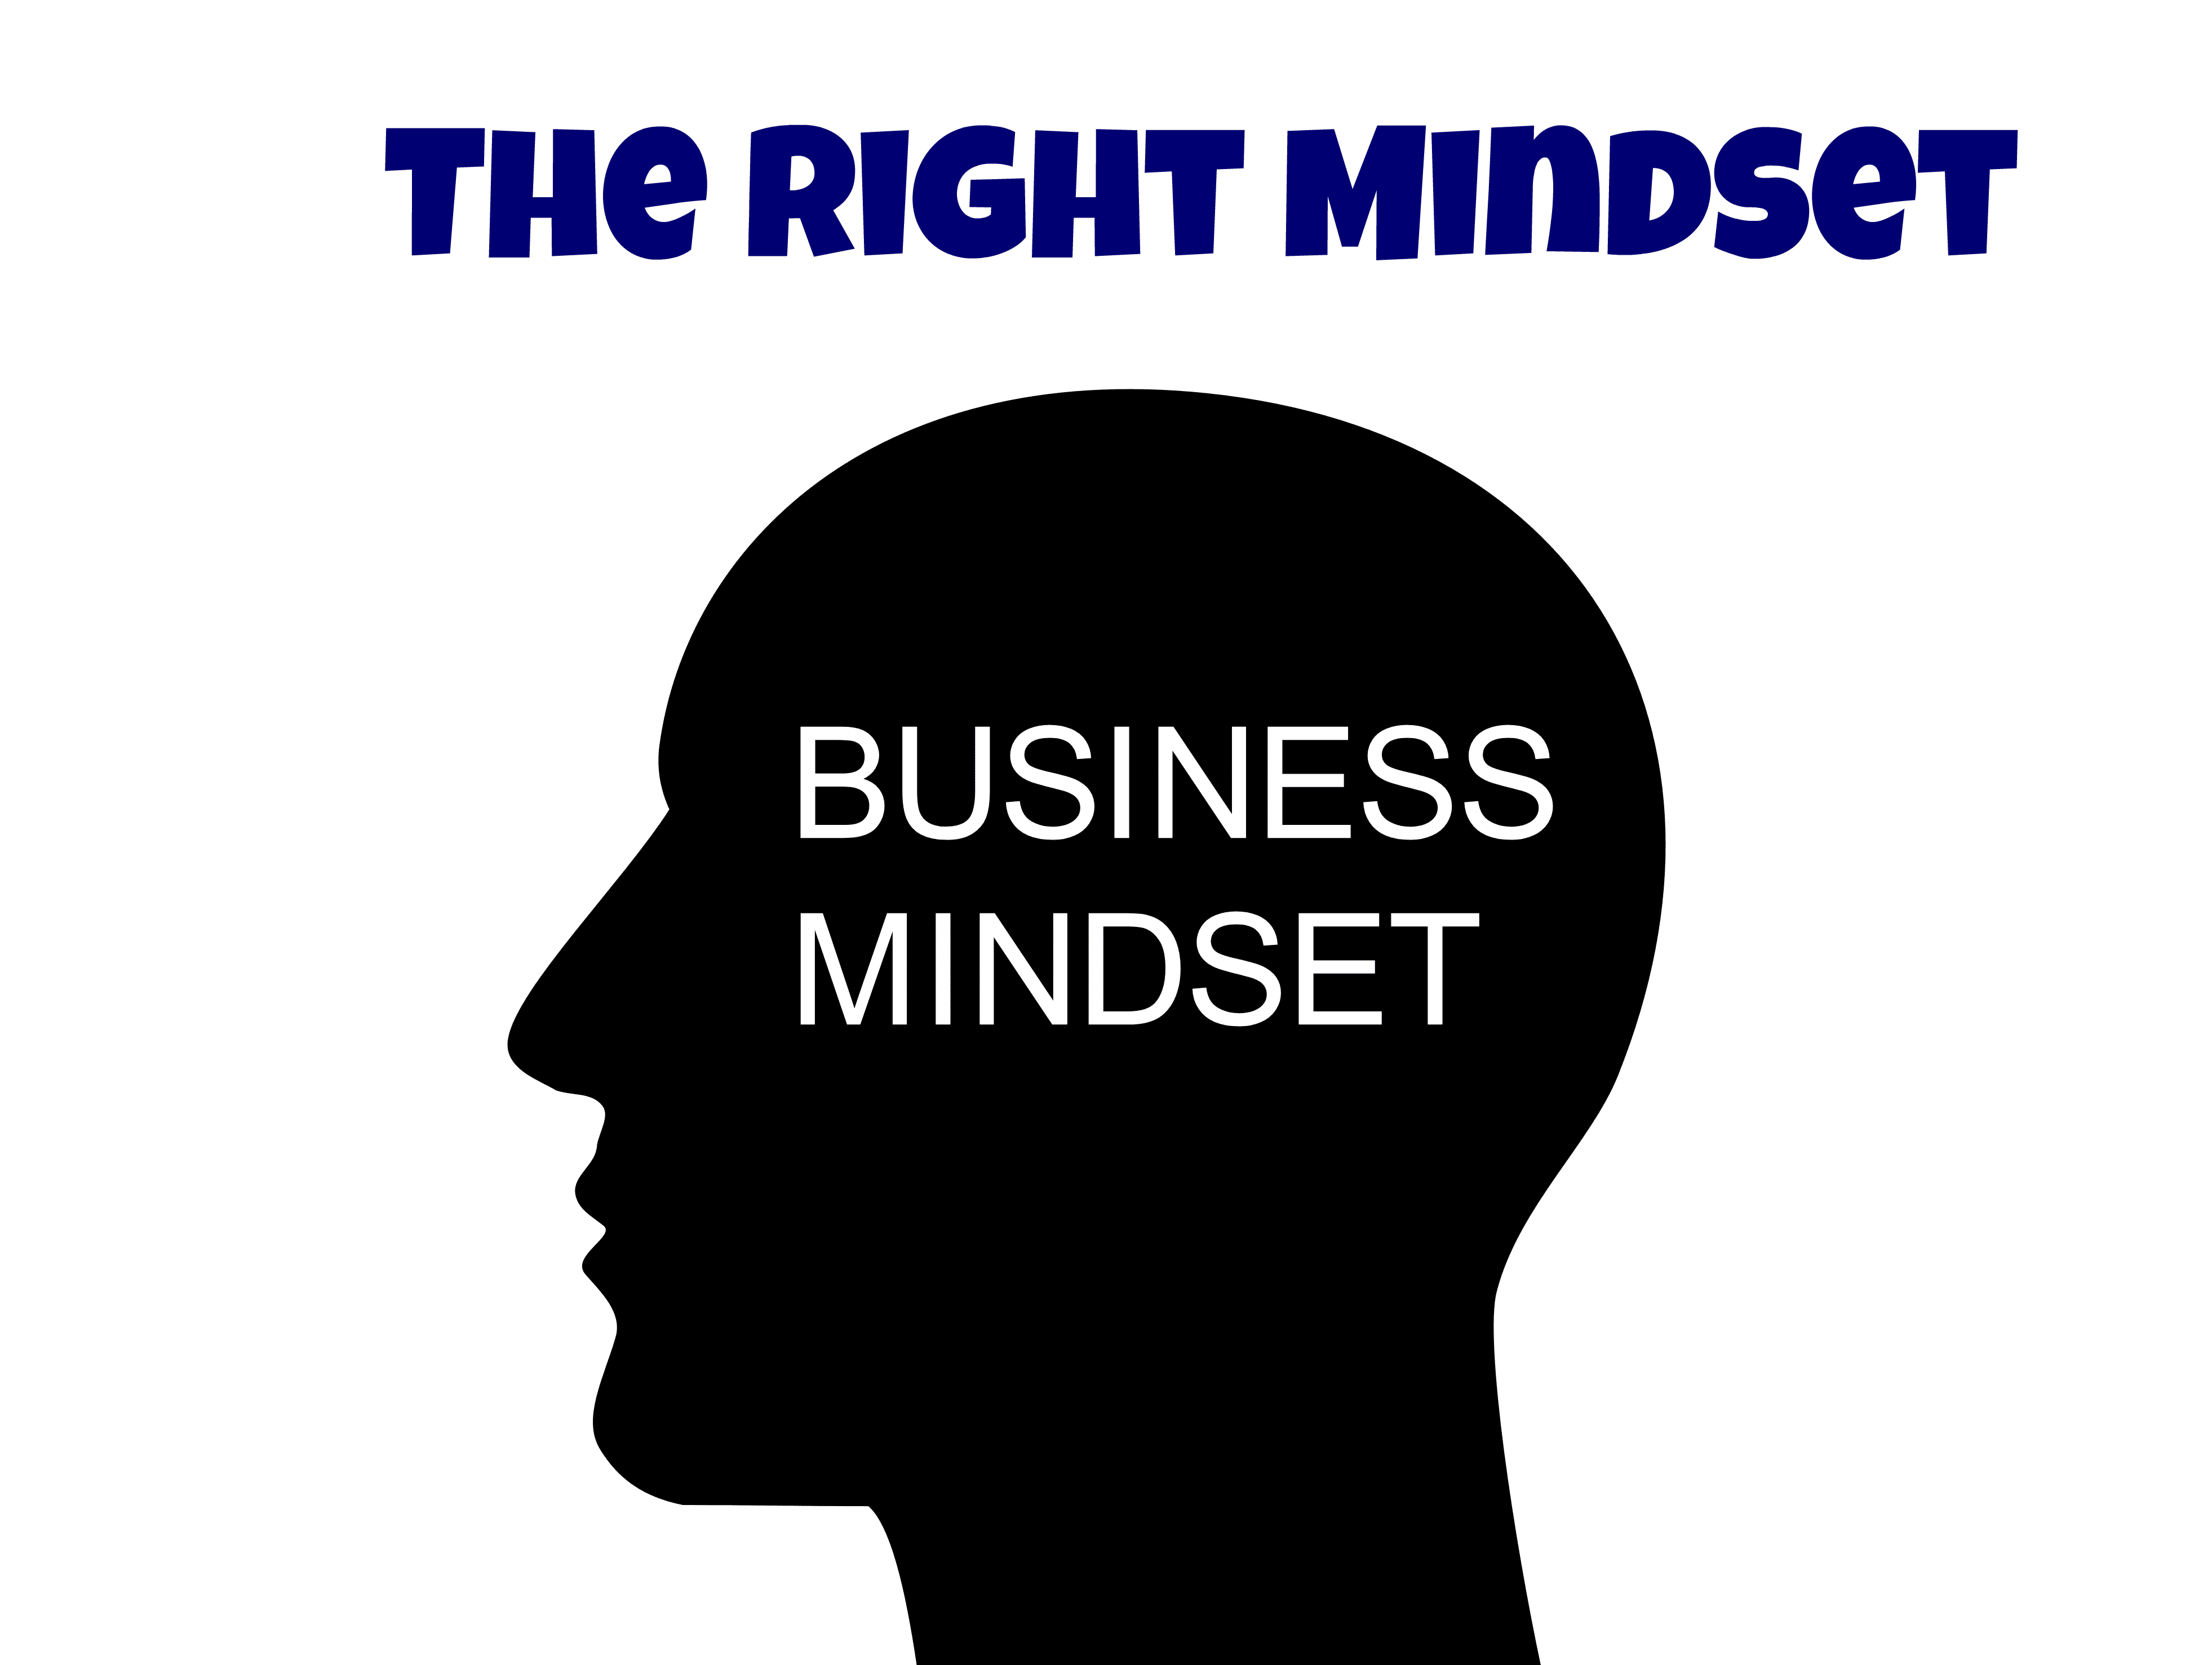 The Right Mindset